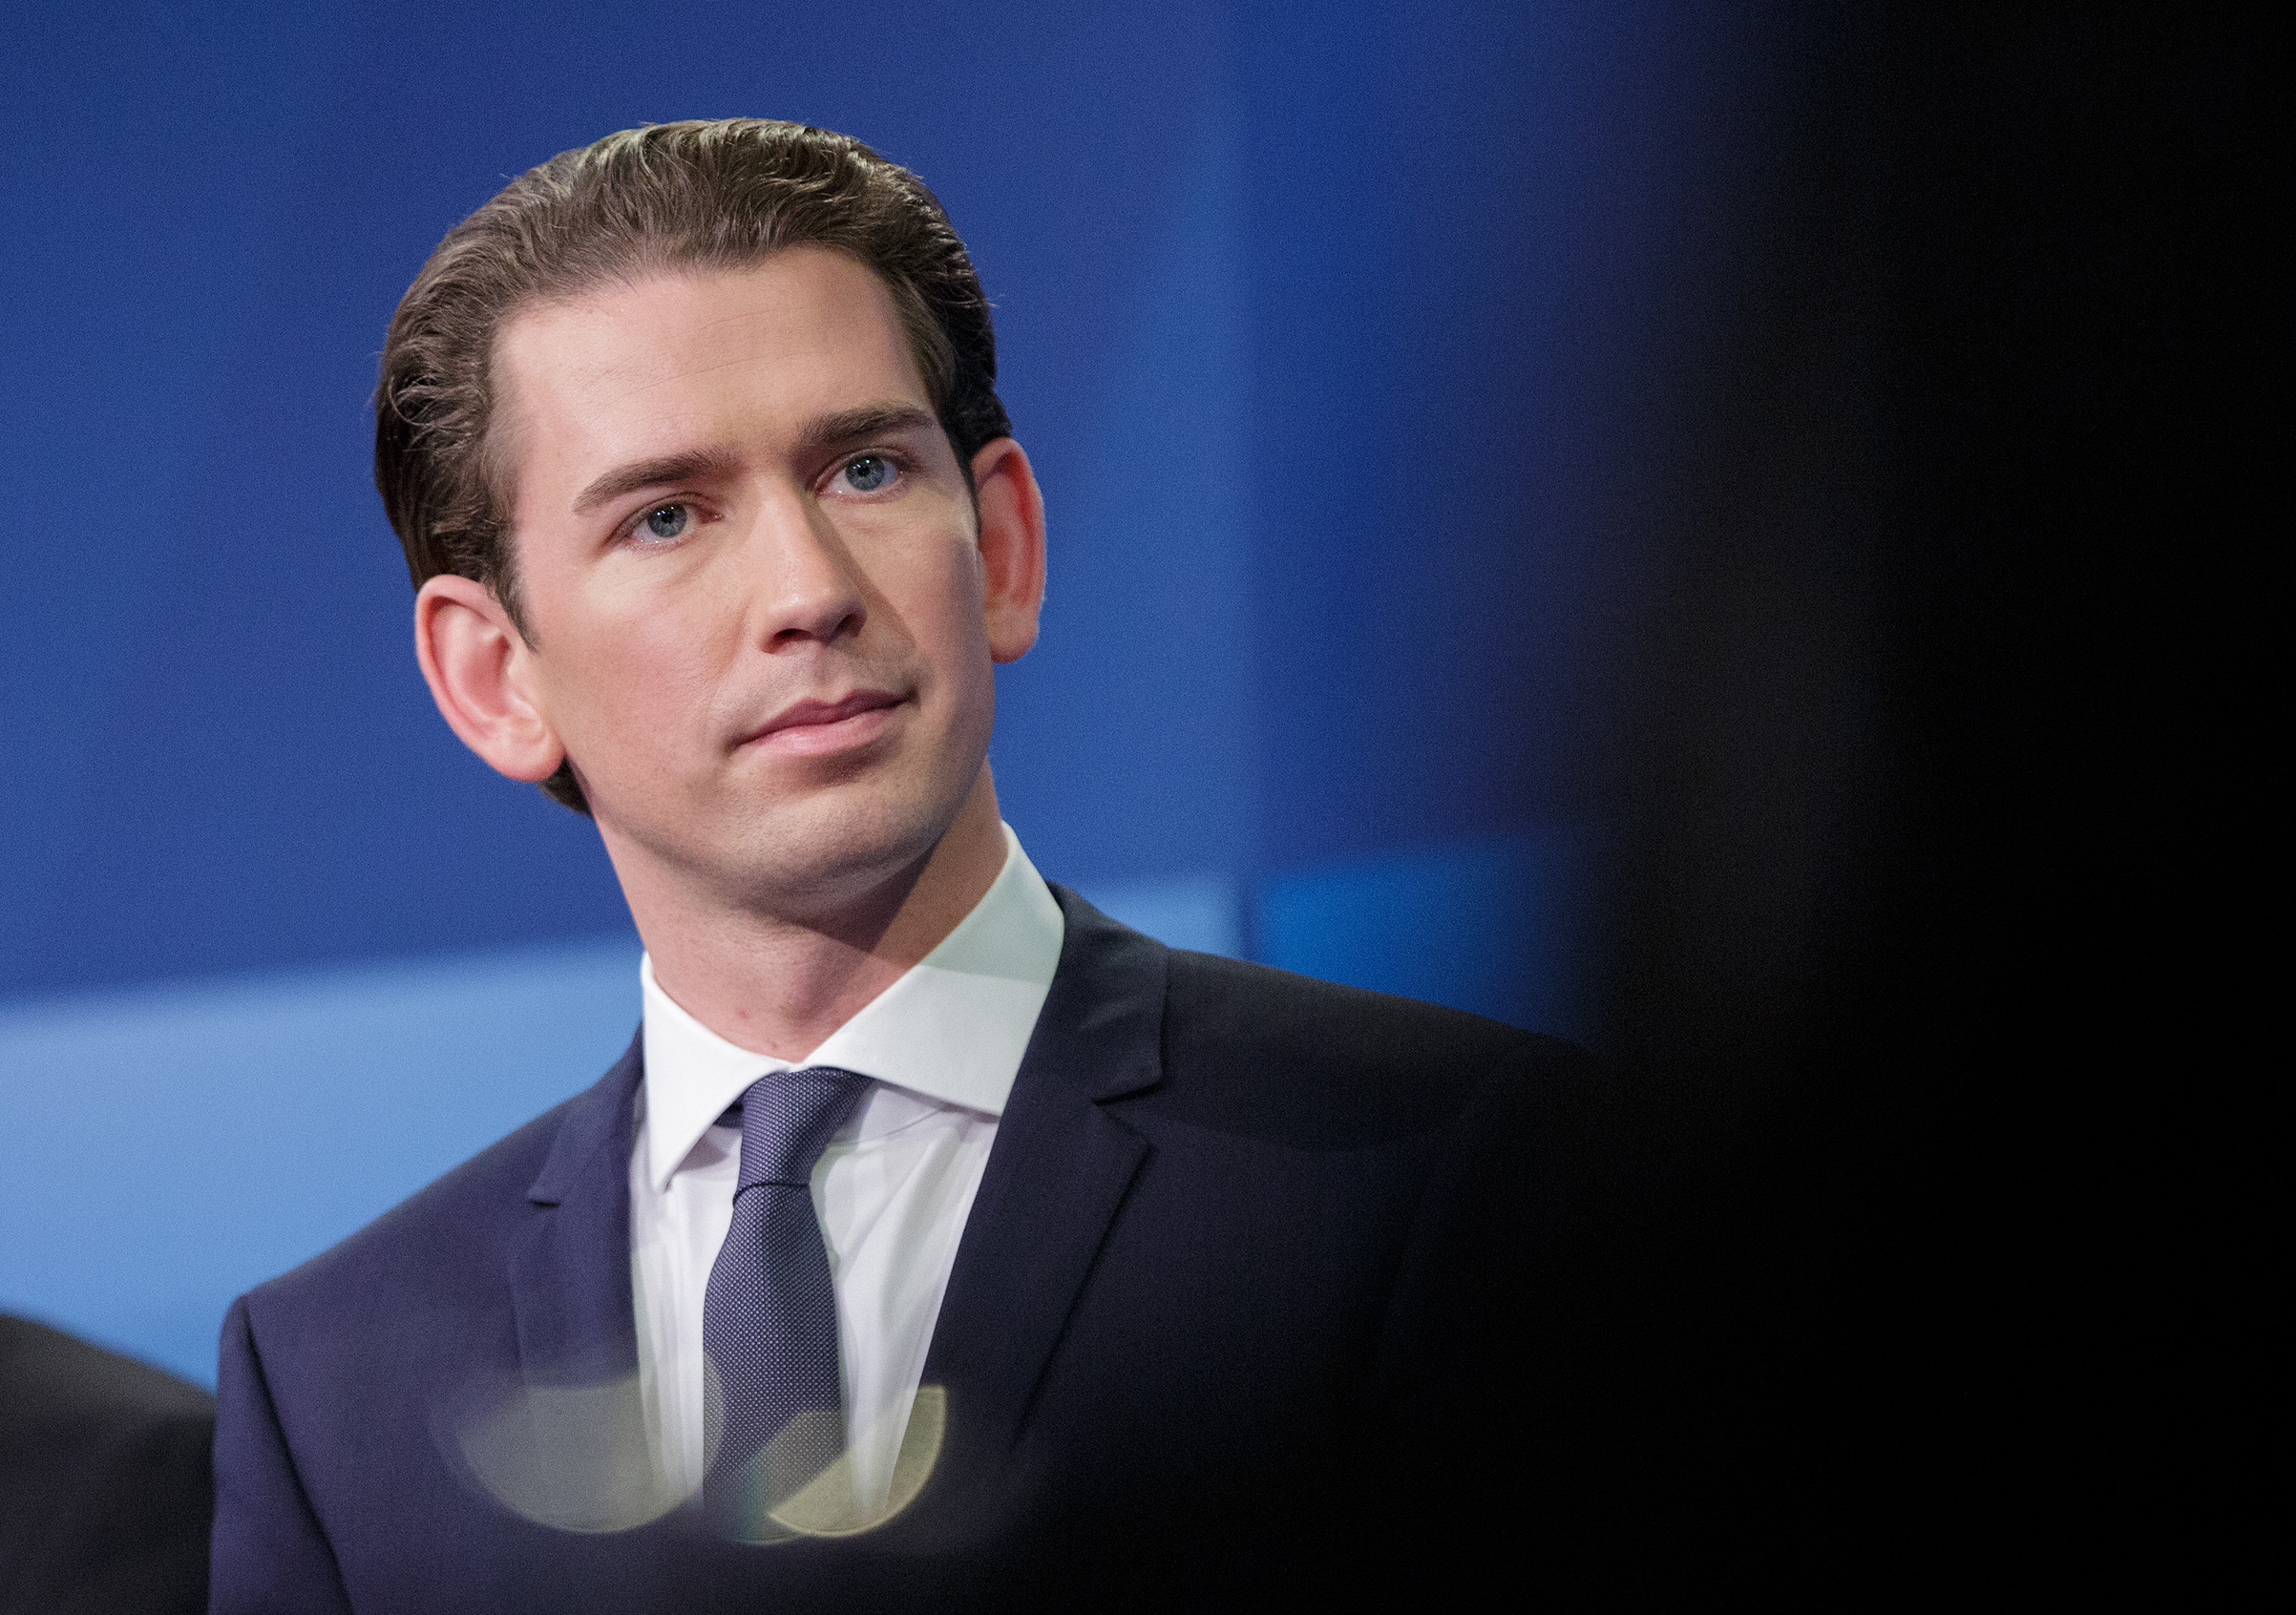 Sebastian Kurz, Austria's foreign minister and leader of the People's Party, participates in a television debate ahead of a federal election in Vienna, Austria, on Oct. 15, 2017. (Lisi Niesner—Bloomberg/Getty Images)